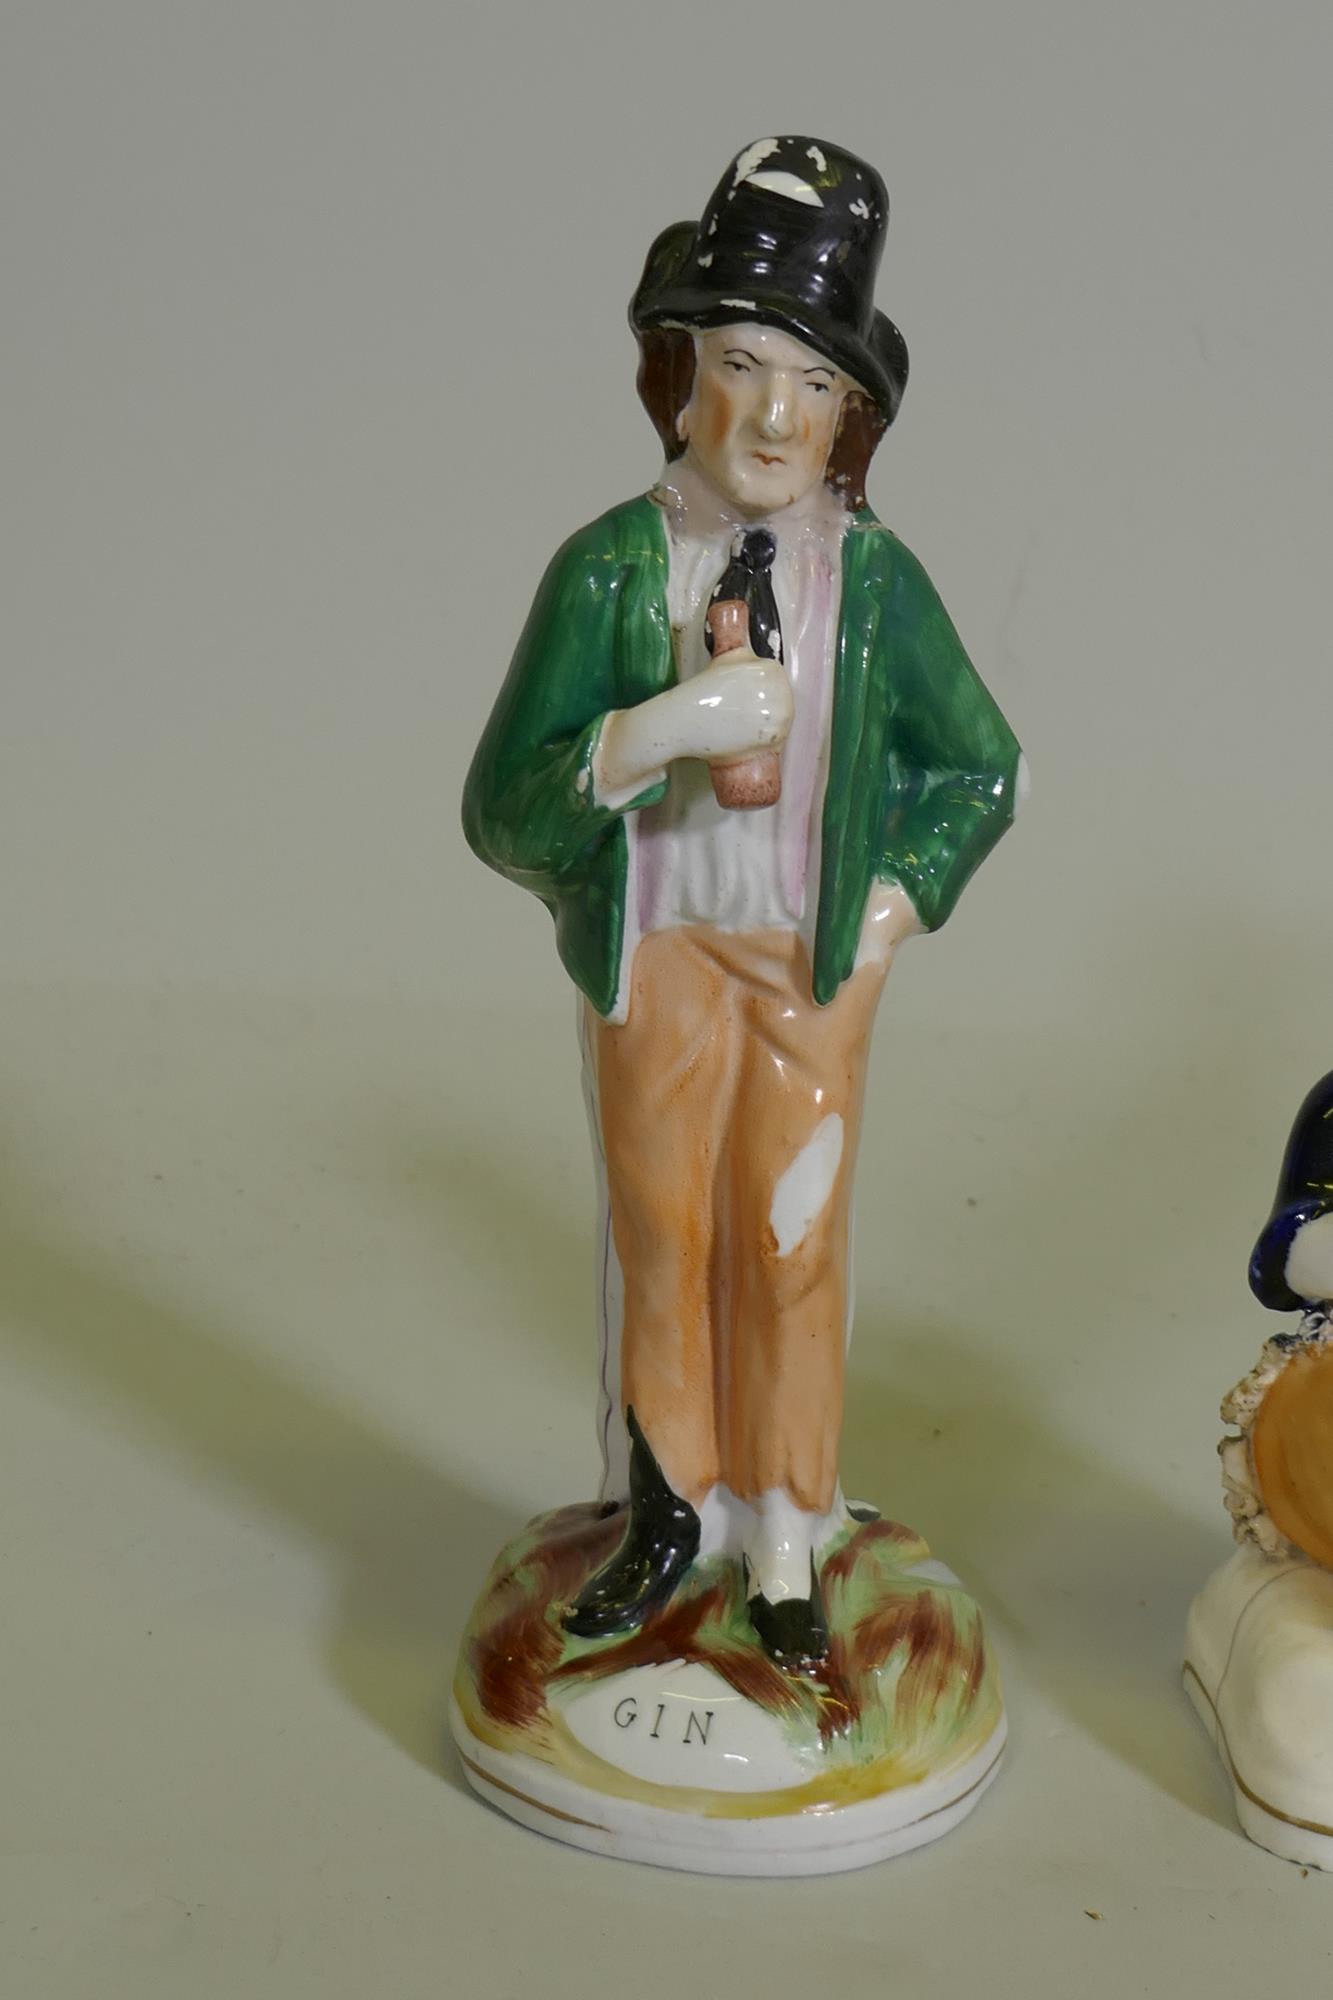 A C19th Staffordshire temperance double sided figure of a Gin and Water drinker, 22cm high, and - Image 2 of 4